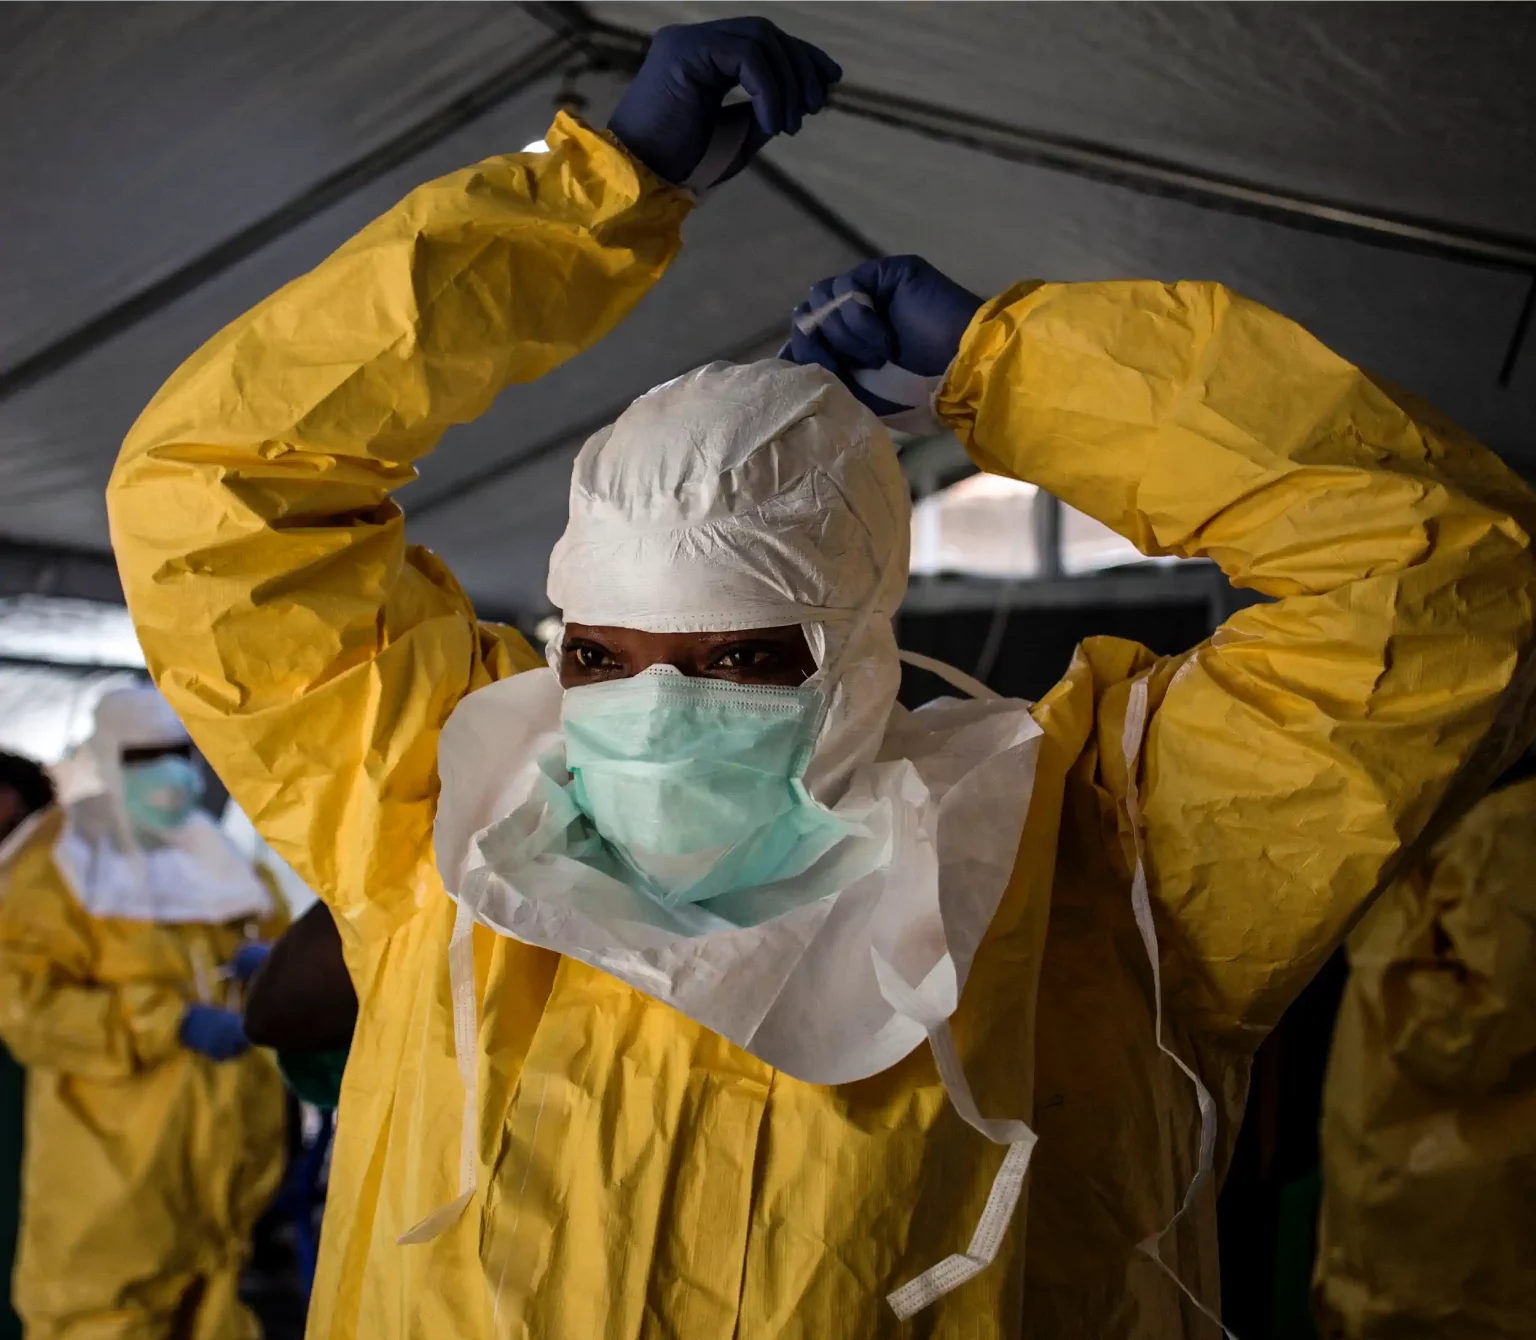 A medical worker puts on her Personal Protective Equipment (PPE) ahead of entering an Ebola Treatment Centre